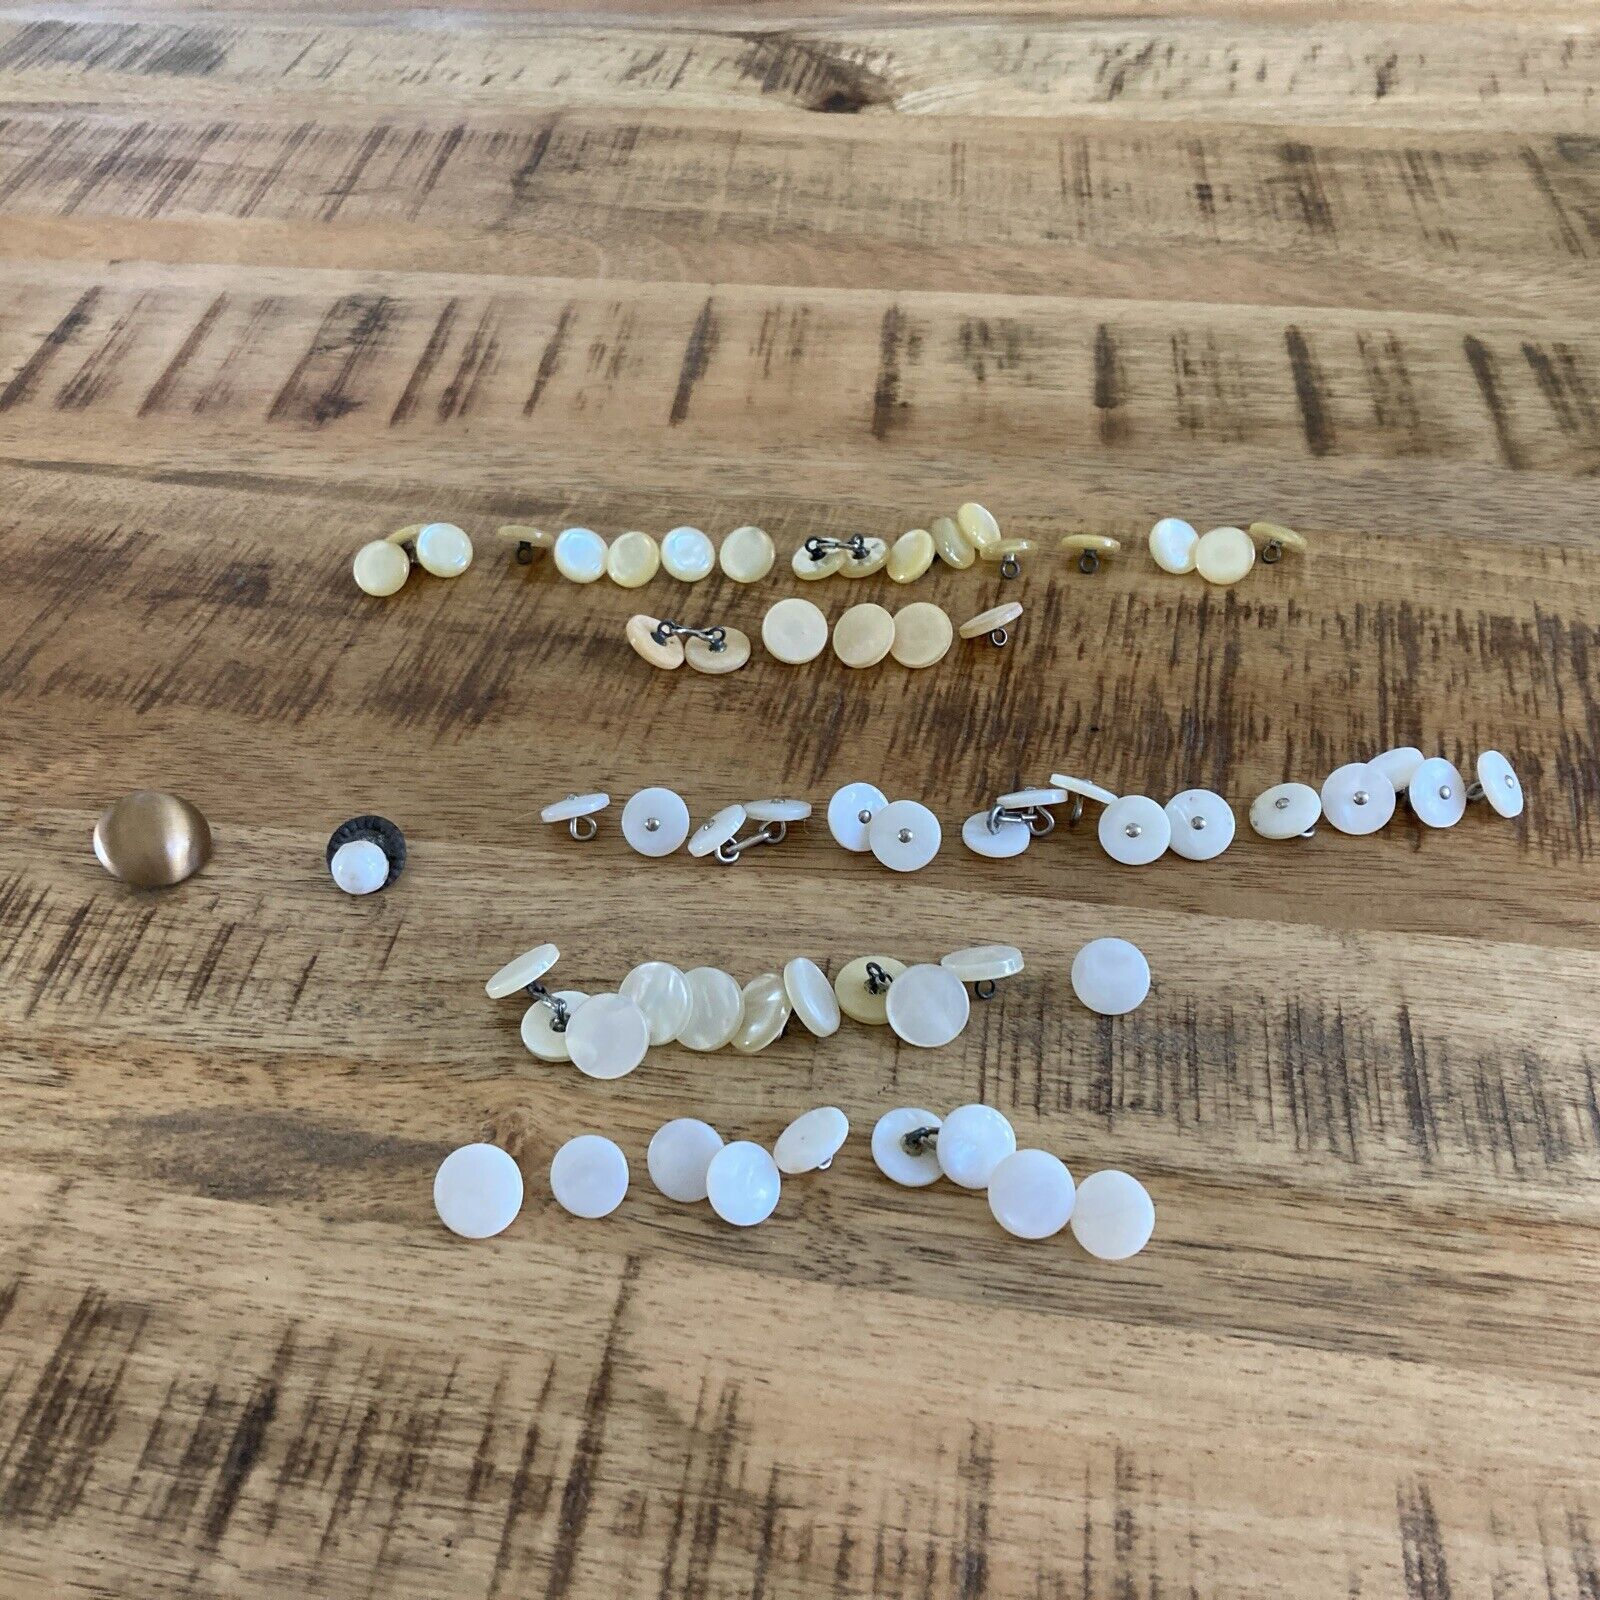 Antique - Vintage Mother of Pearl ? Buttons Lot of 60